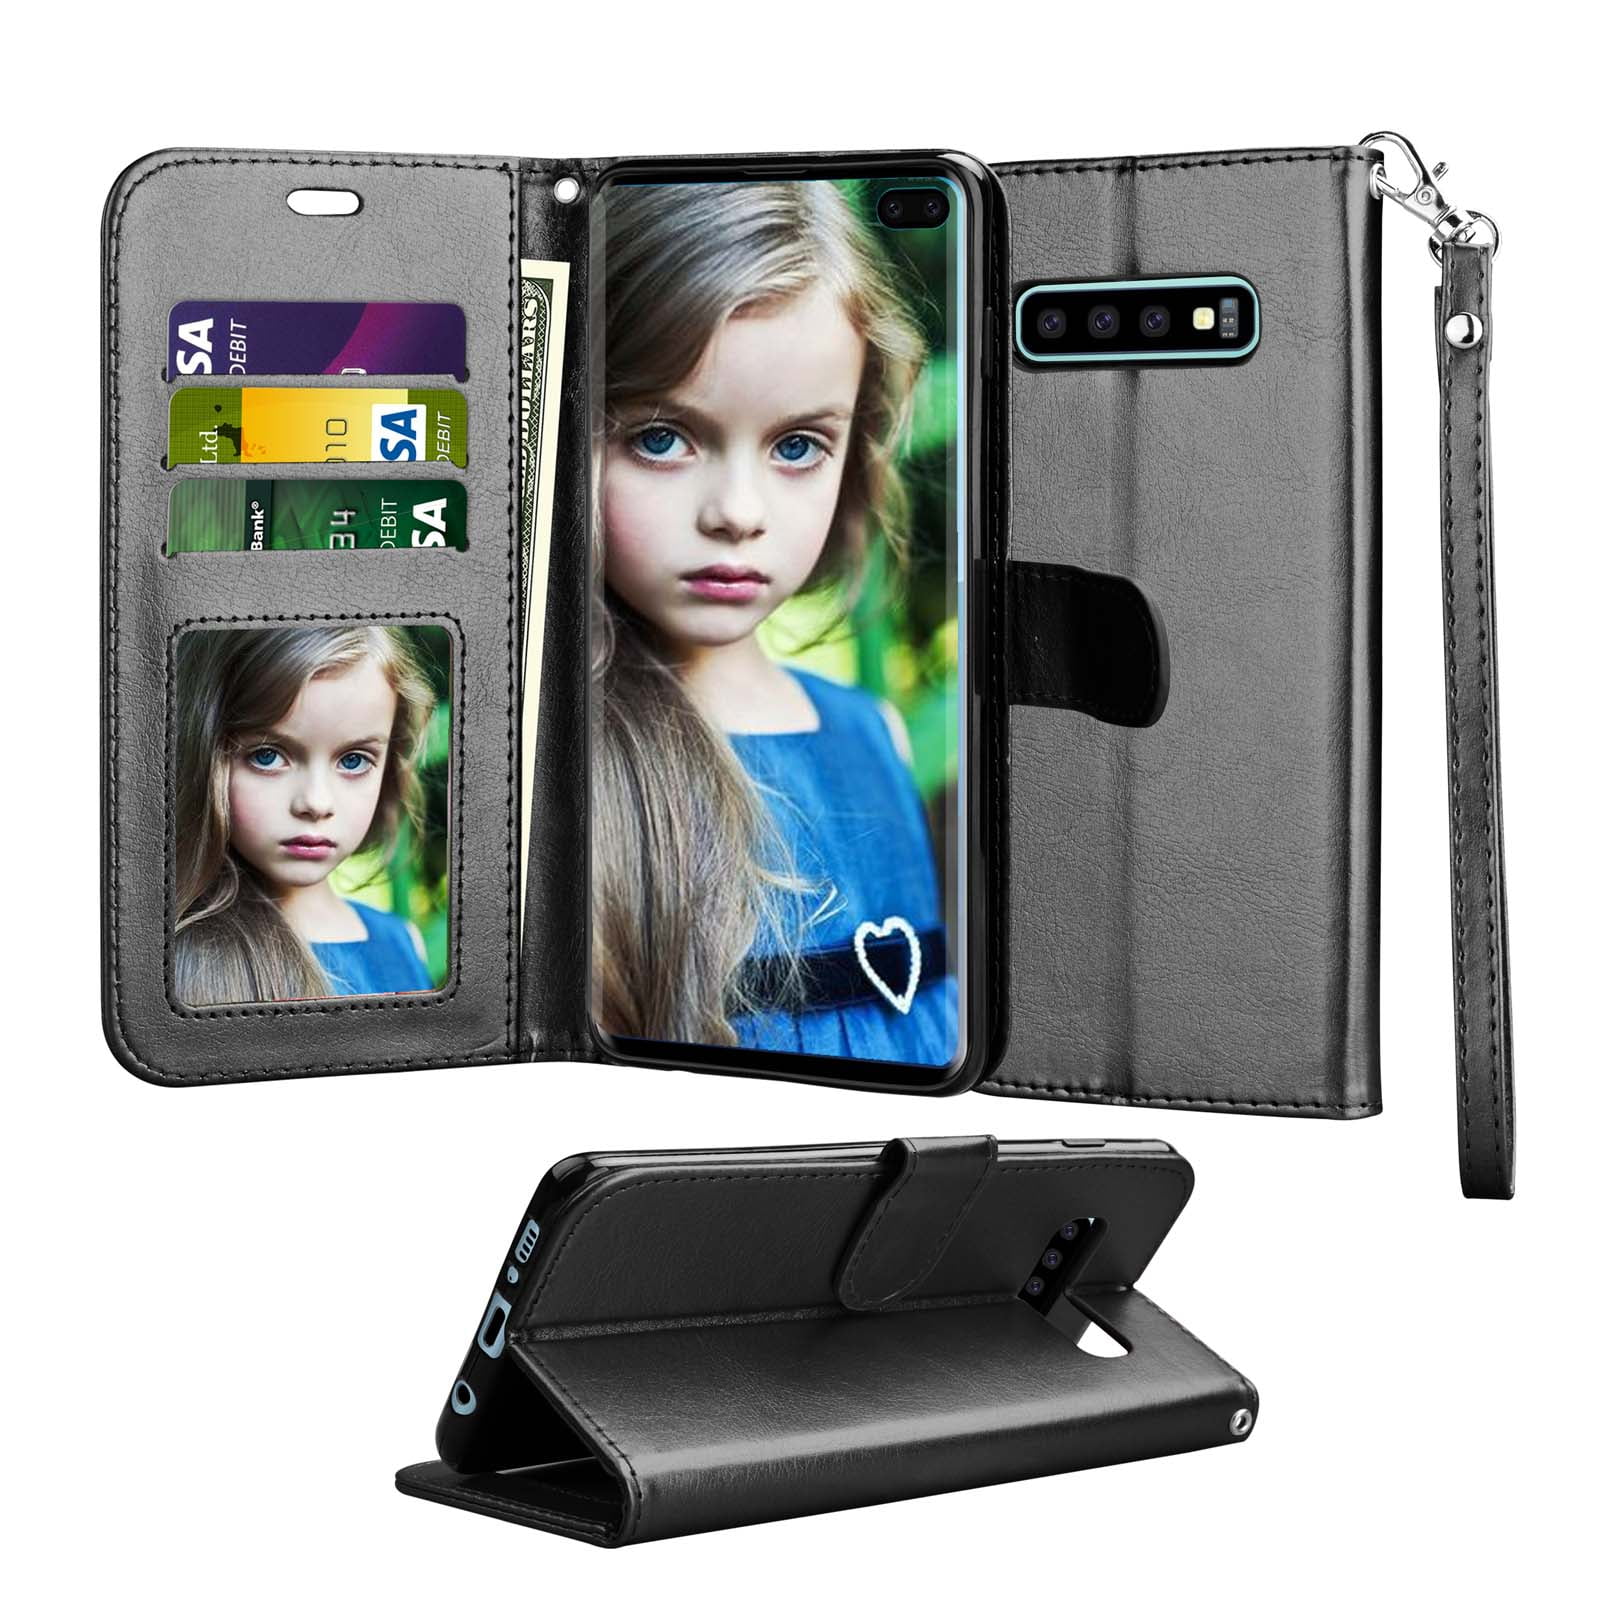 Black PU Leather Cover Compatible with Samsung Galaxy S10 Flip Case for Samsung Galaxy S10 